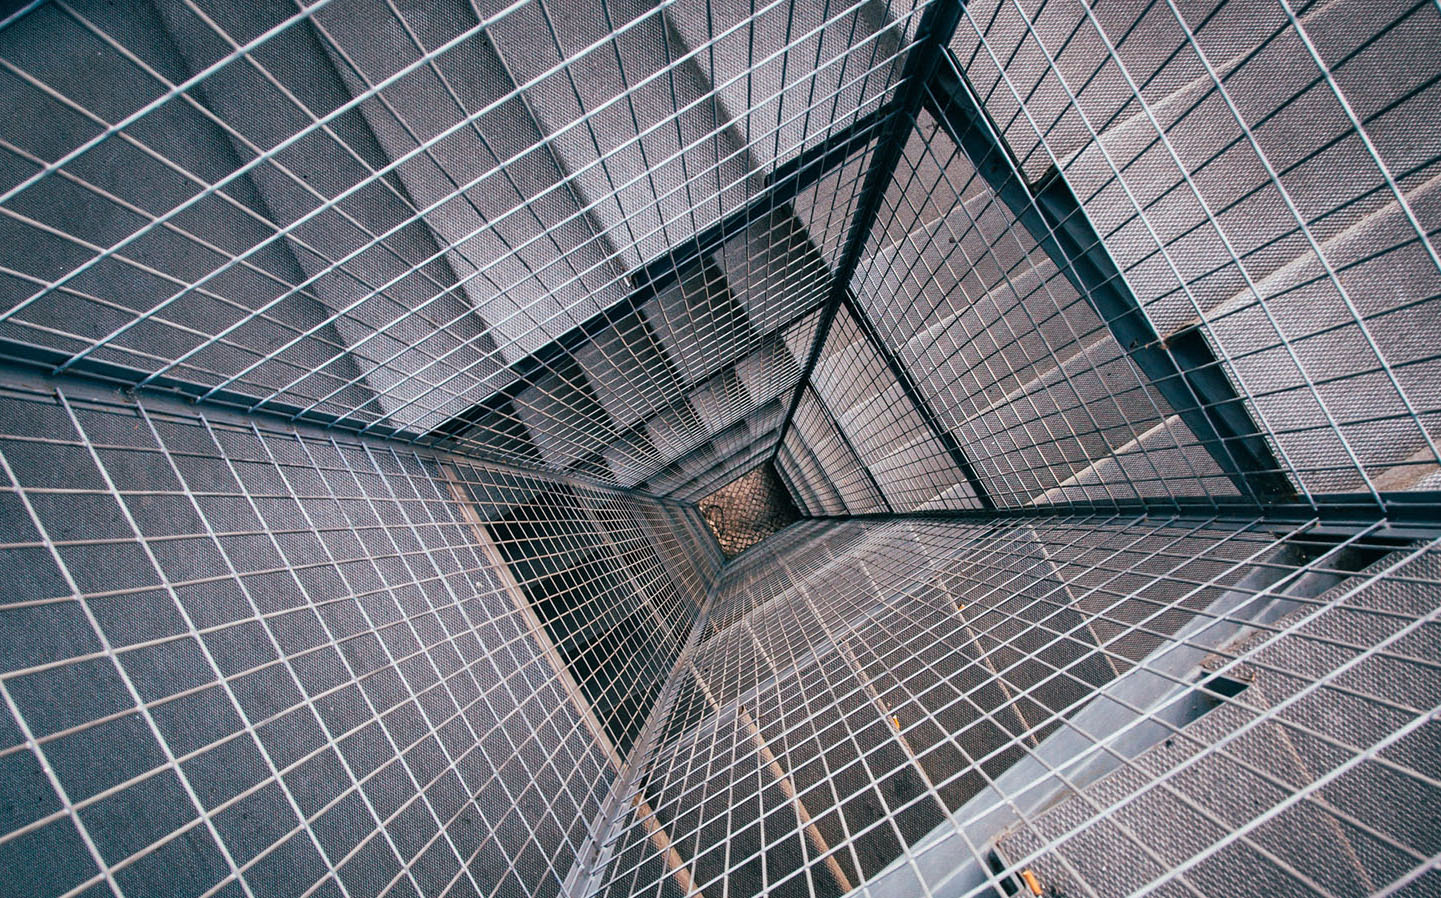 A metal fence around the center of the open space between a spiral staircase.